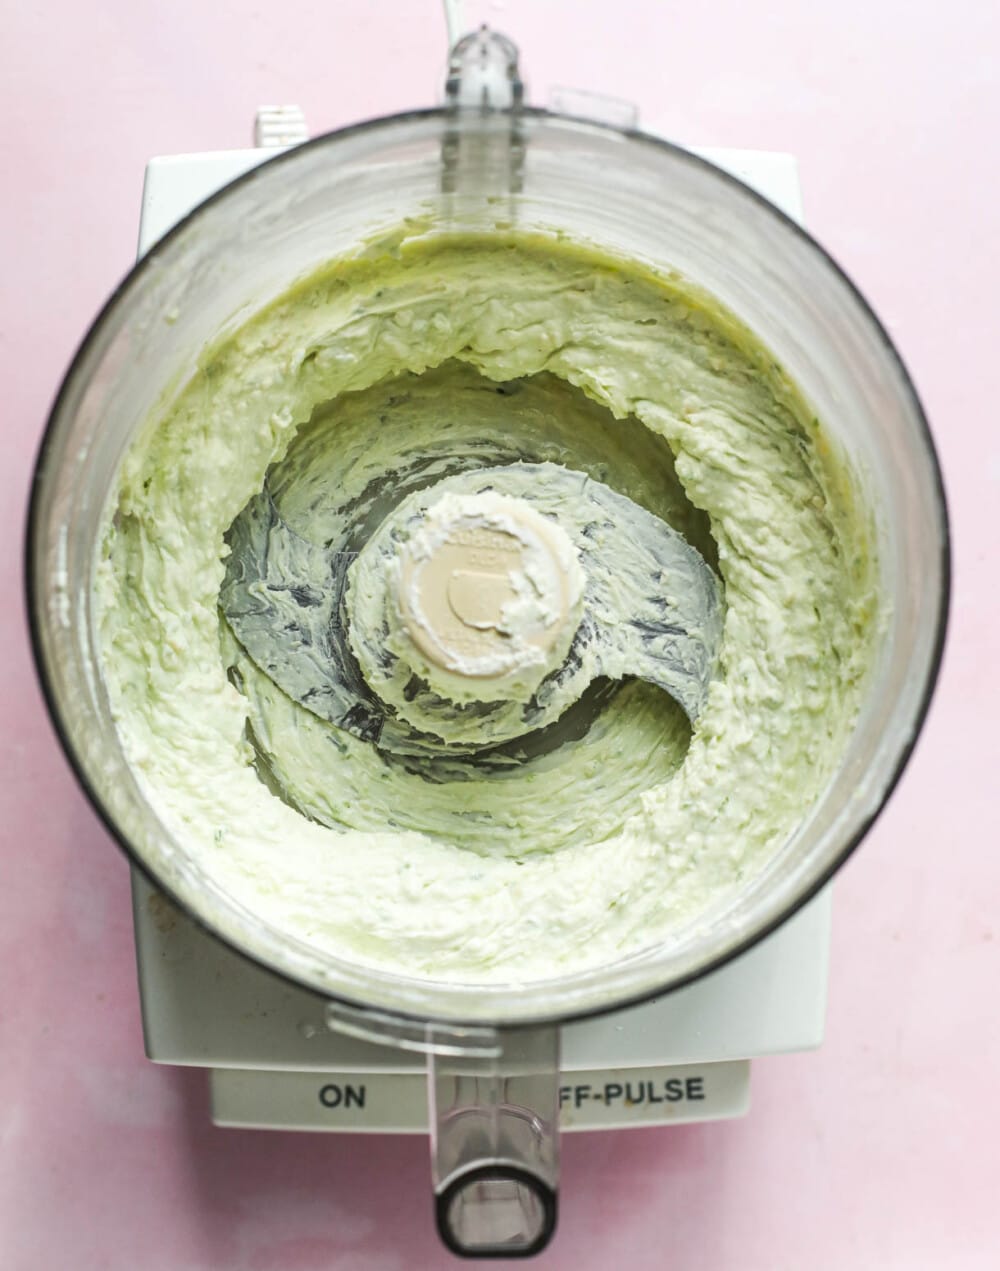 jalapeno cream cheese blended in food processor